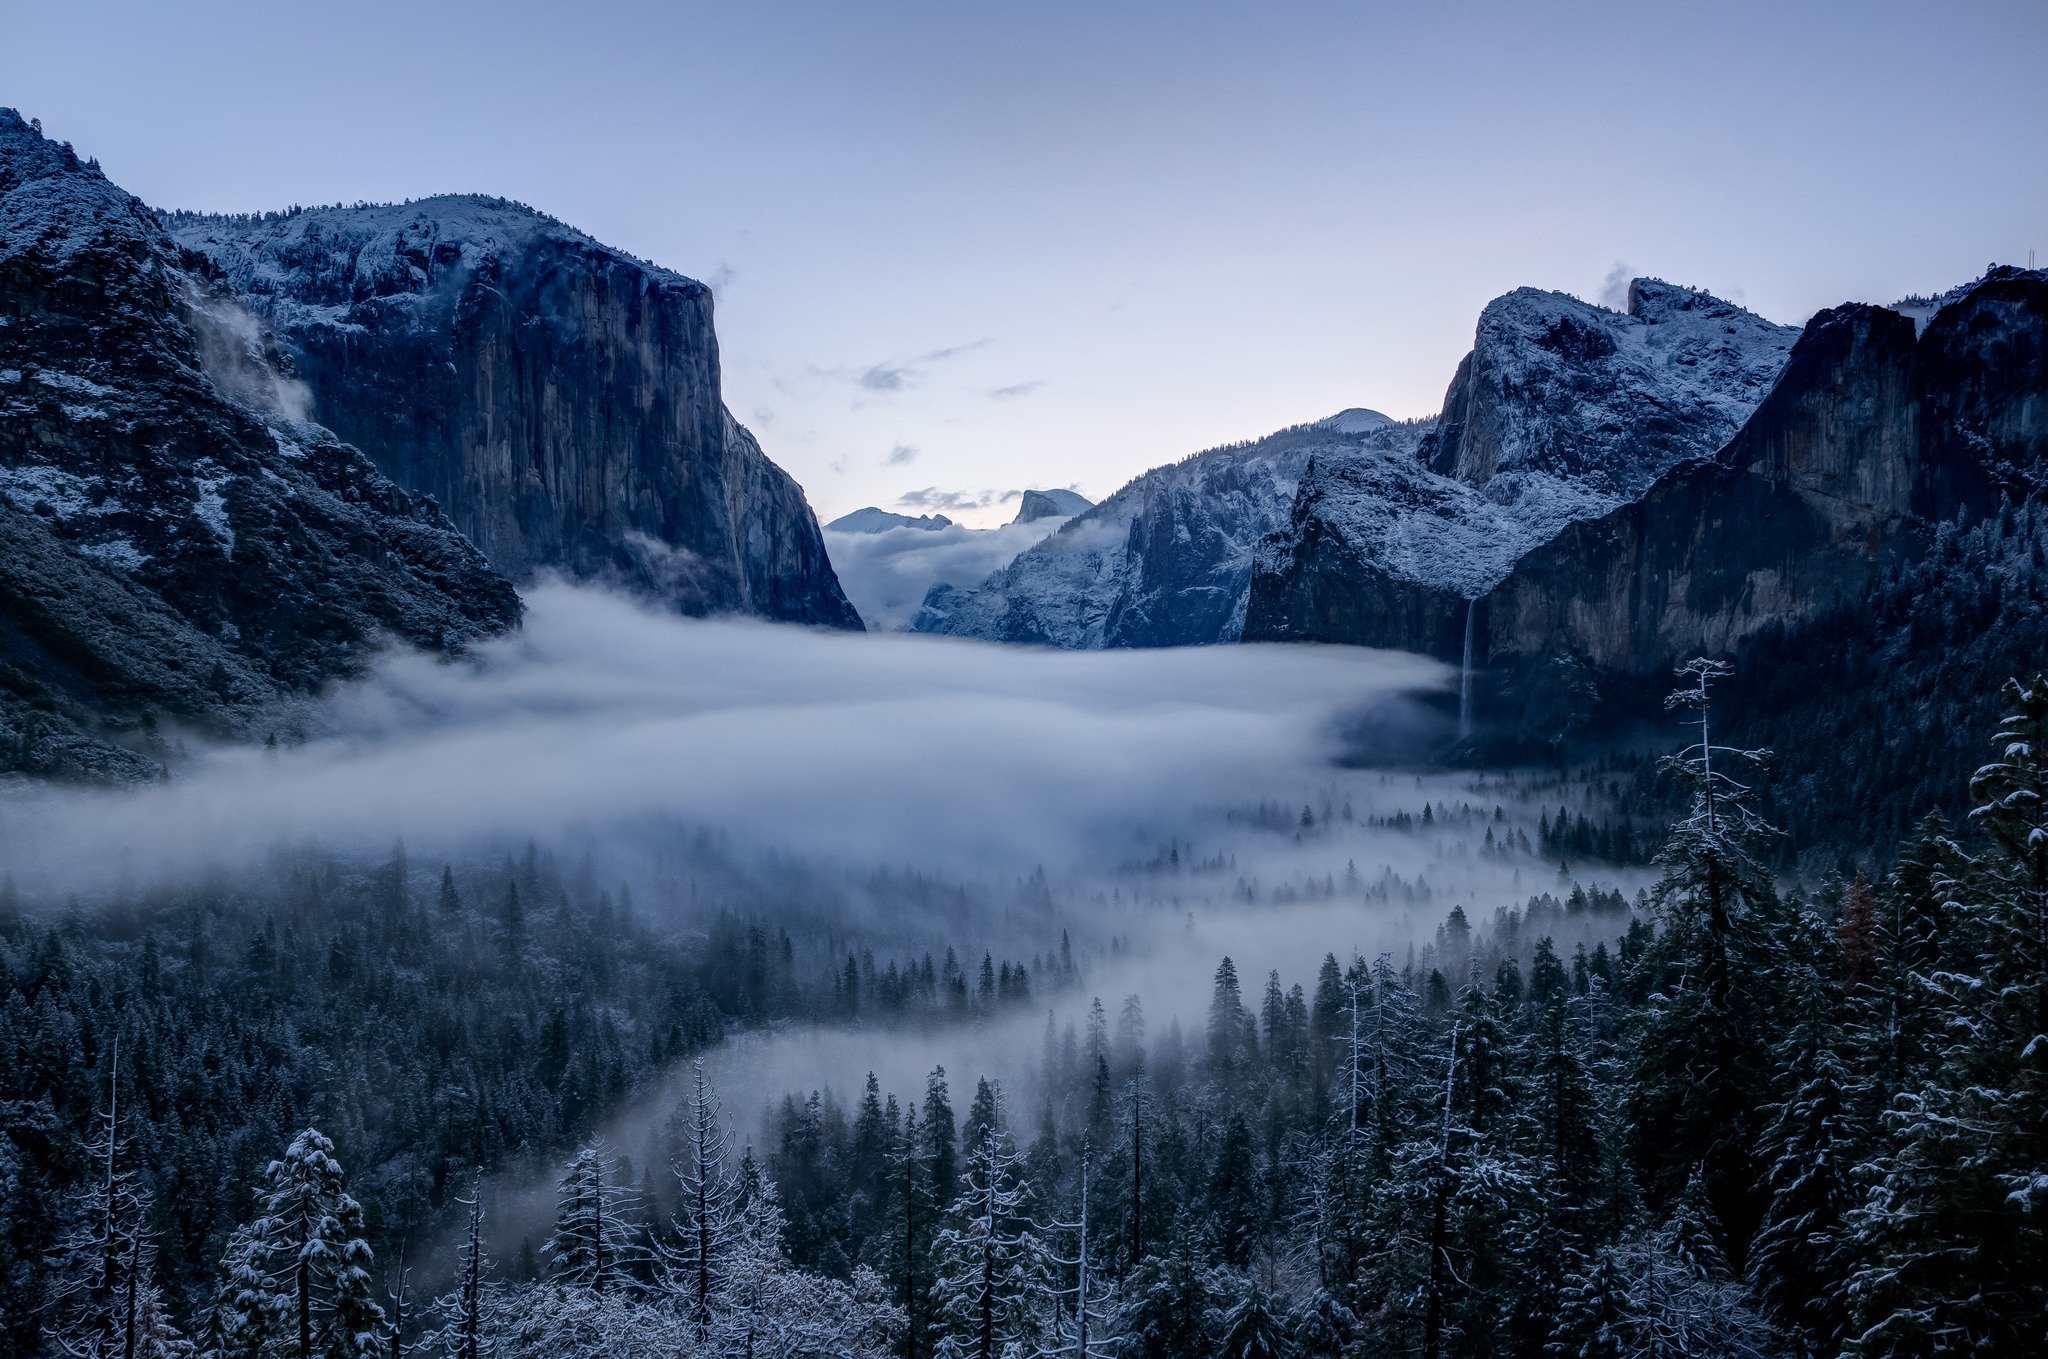 yosemite valley with snow in winter